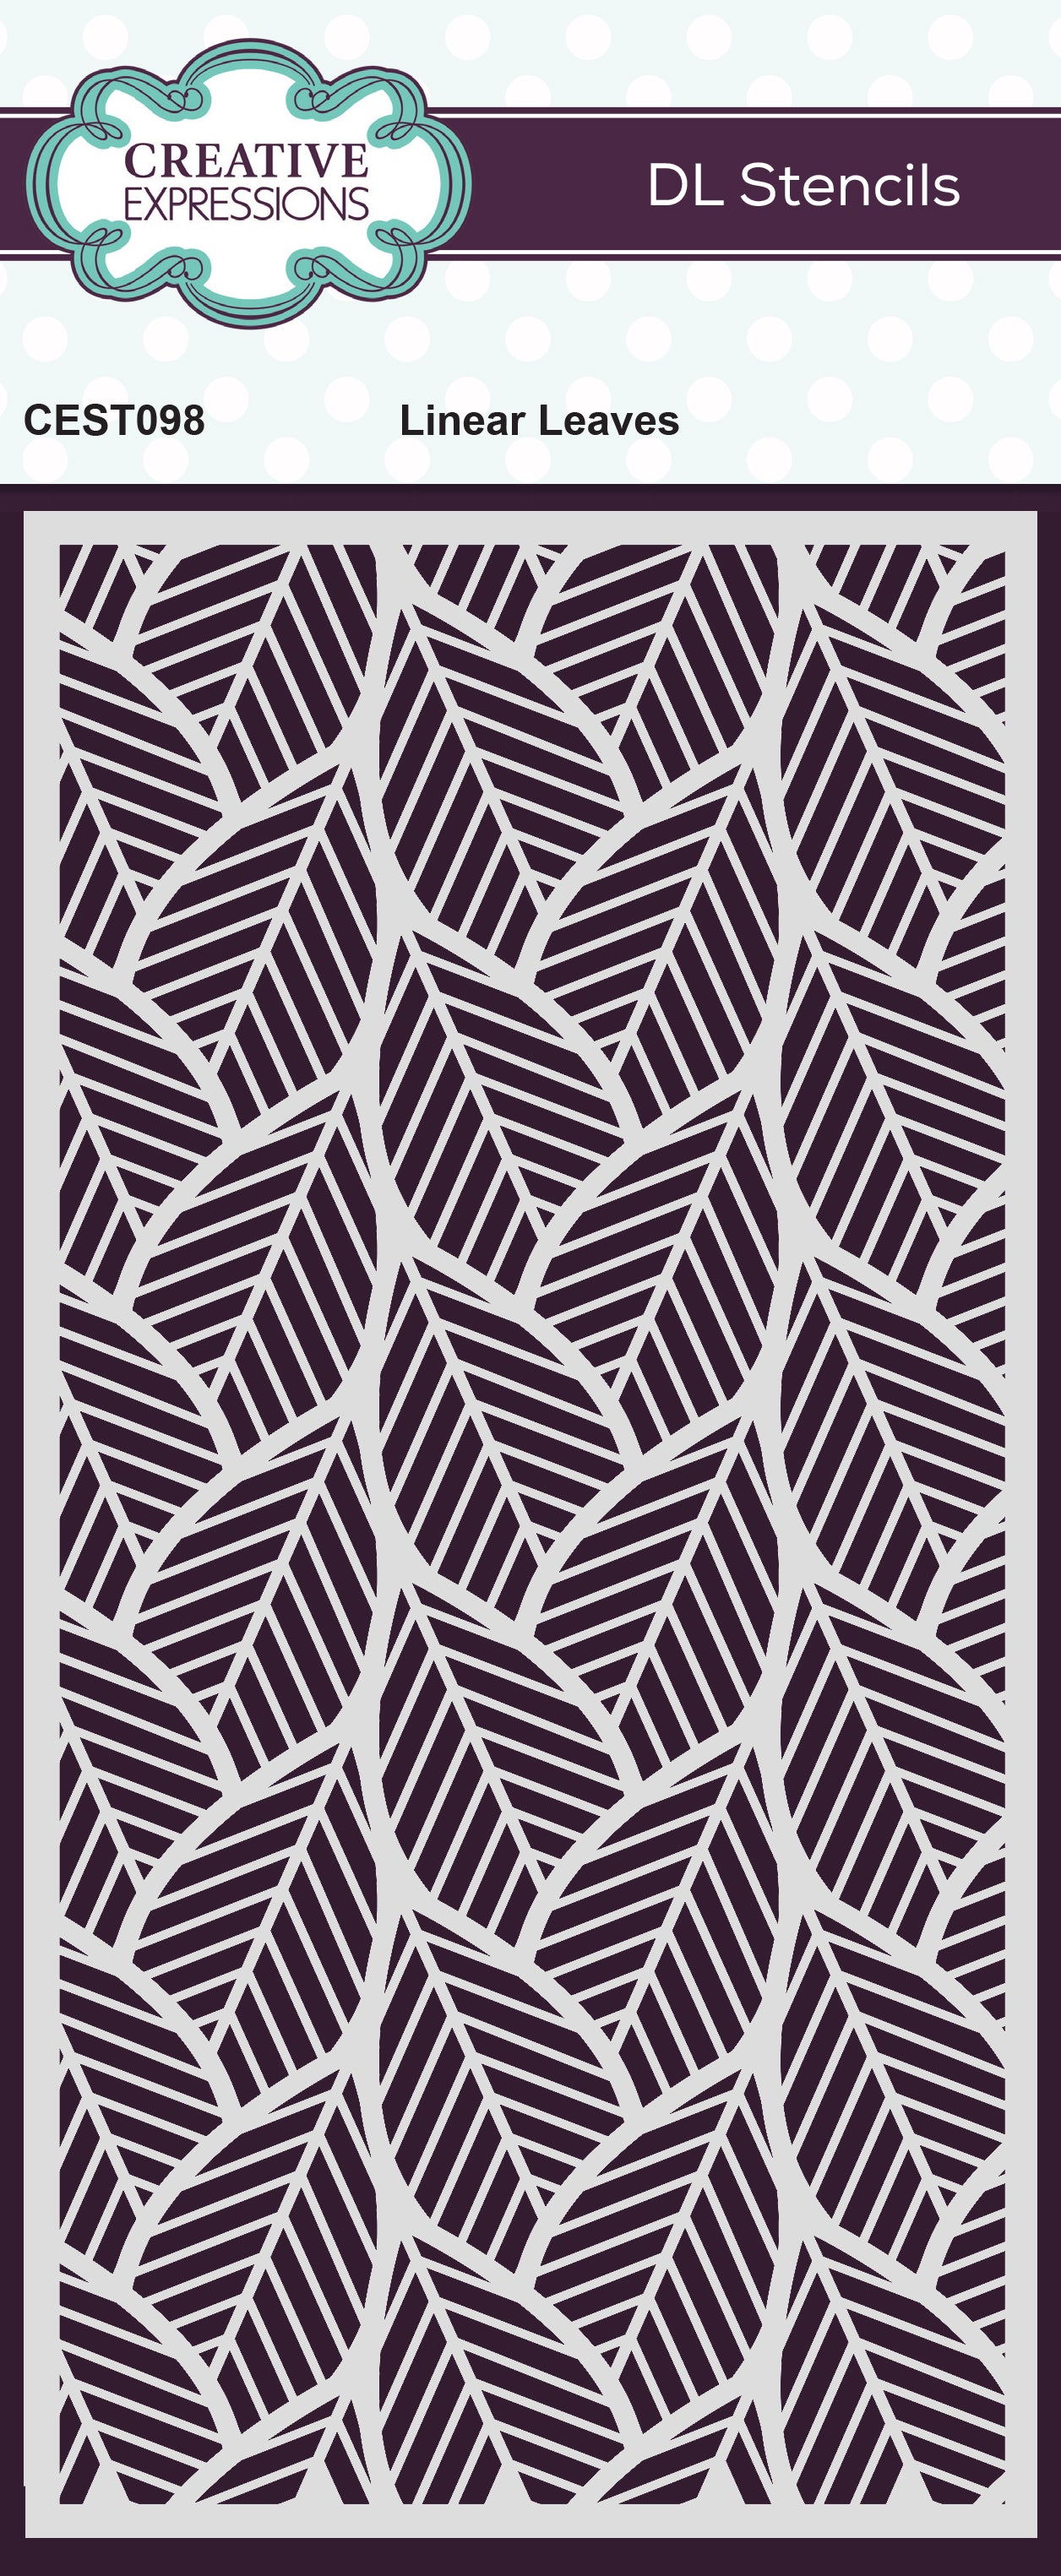 Creative Expressions Linear Leaves DL Stencil 4 in x 8 in (10.0 x 20.3 cm)